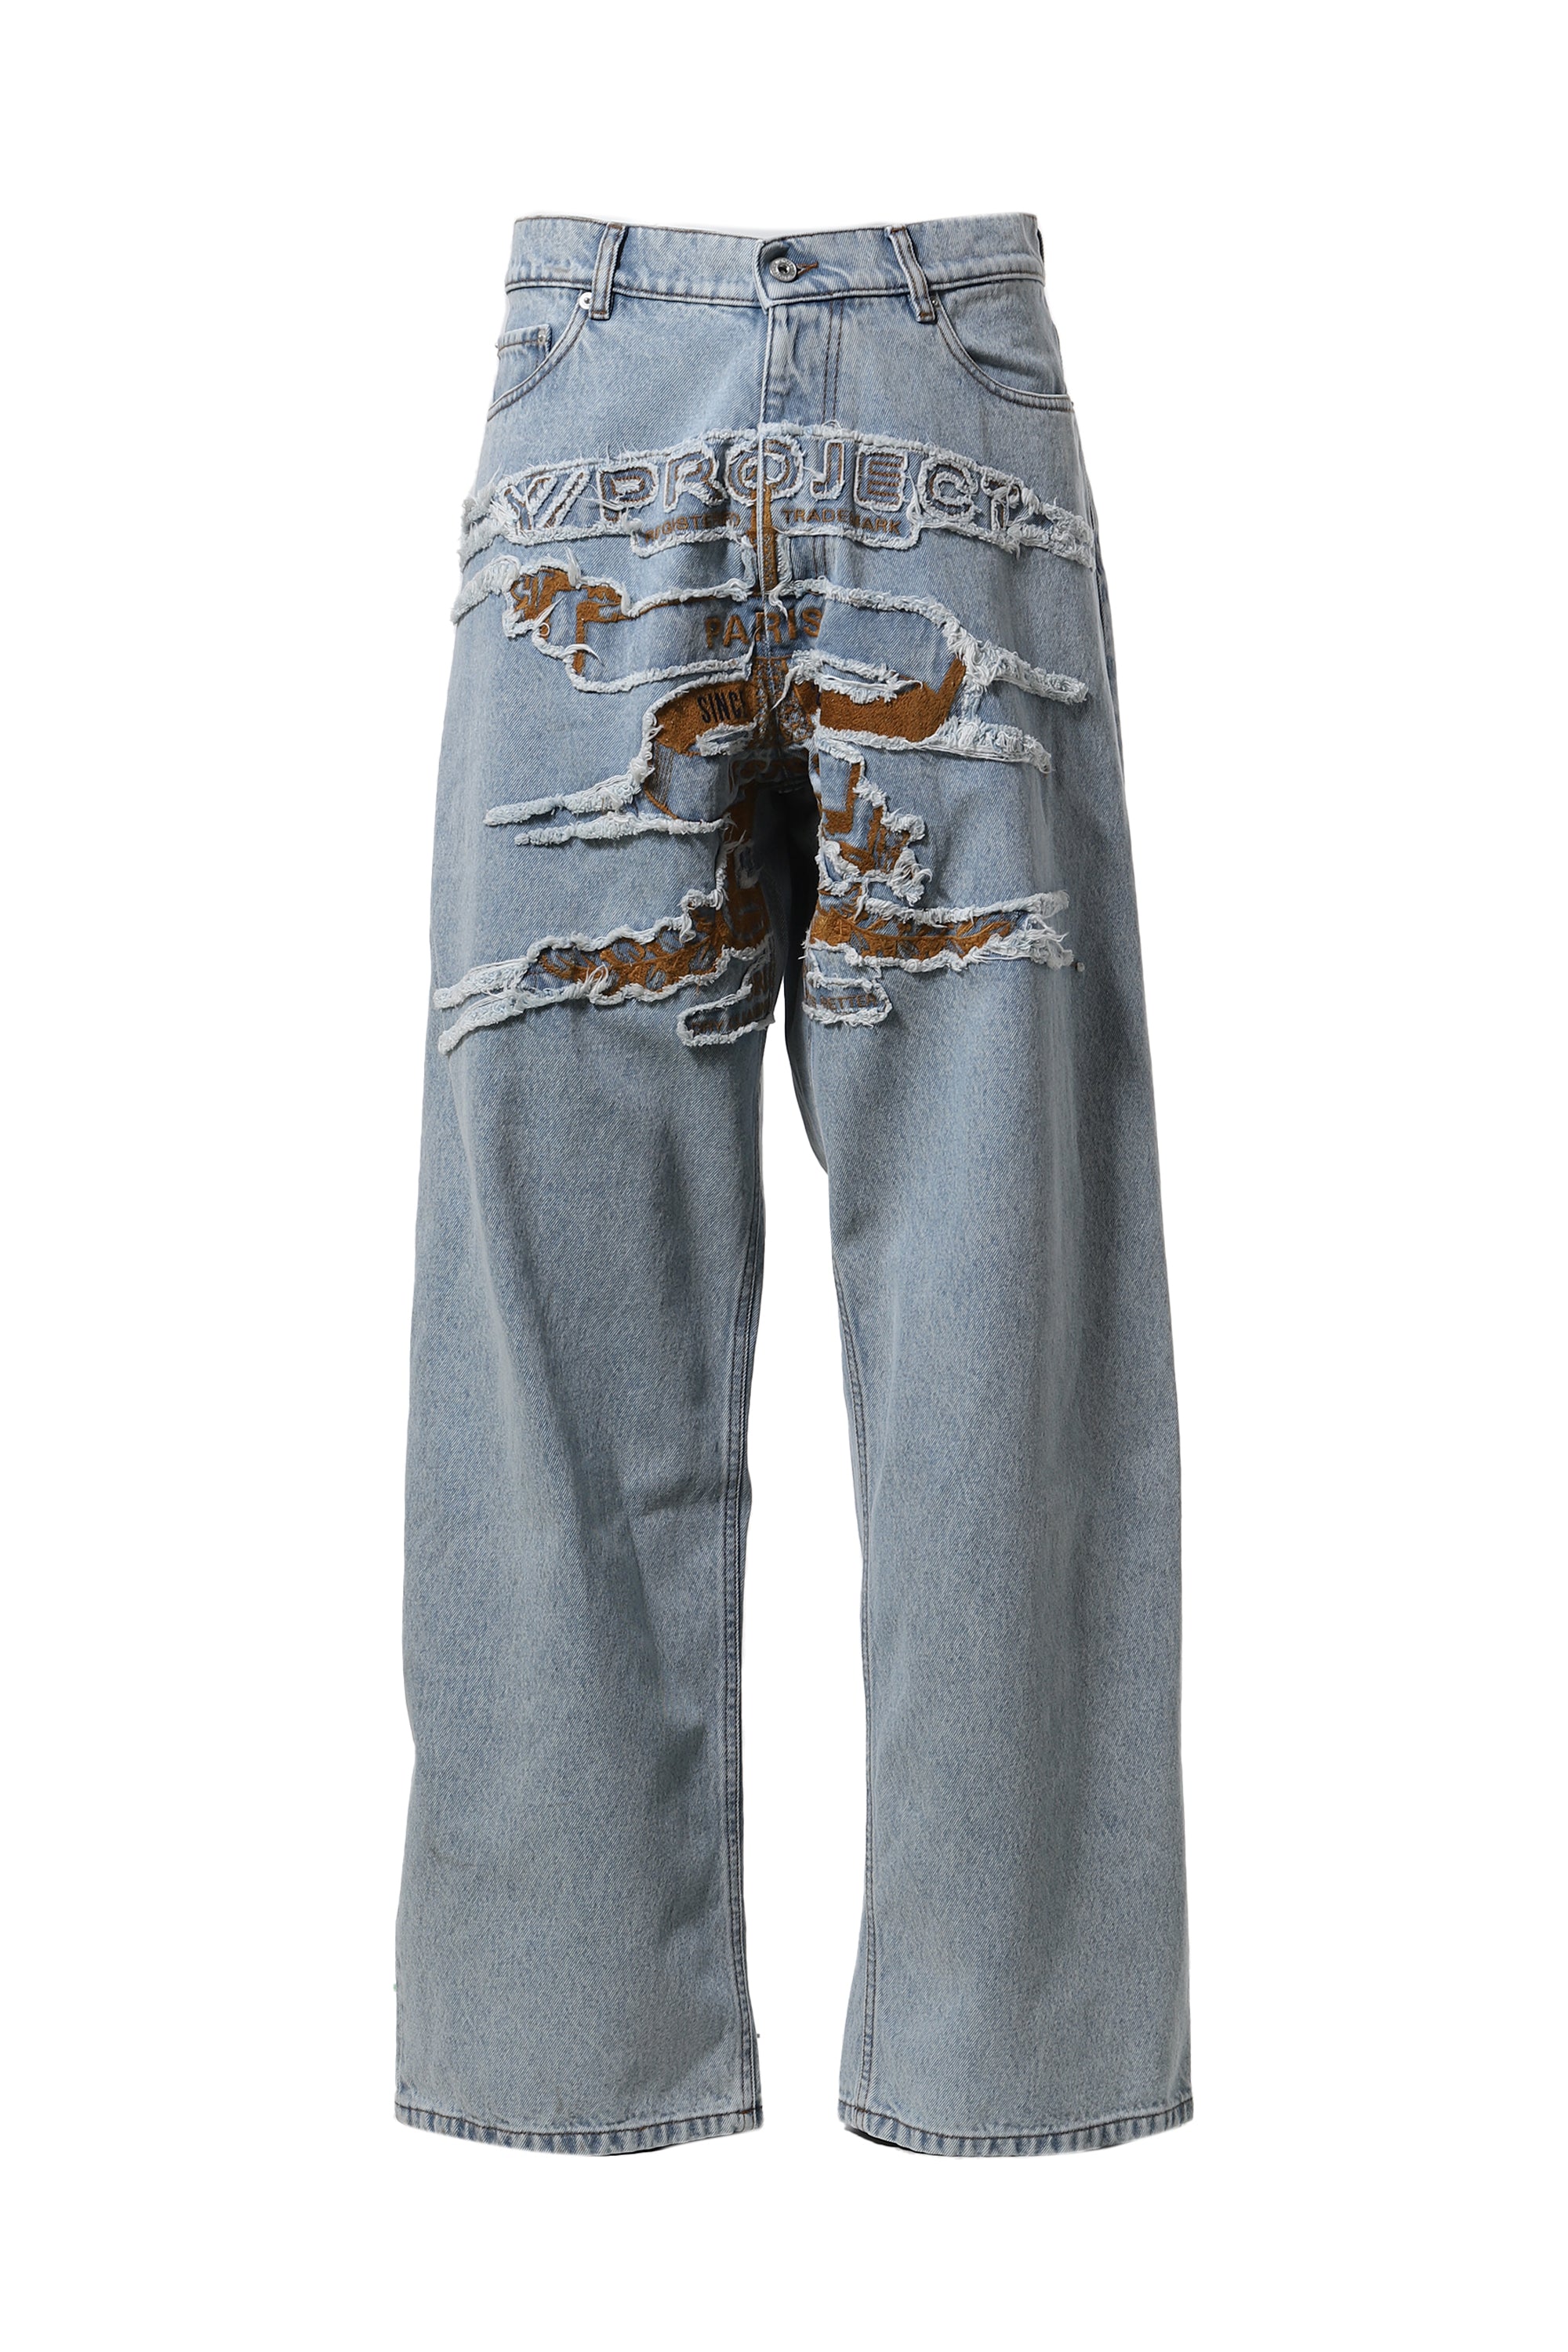 Y/PROJECT ワイプロジェクト SS24 PARIS' BEST PATCH JEANS ...